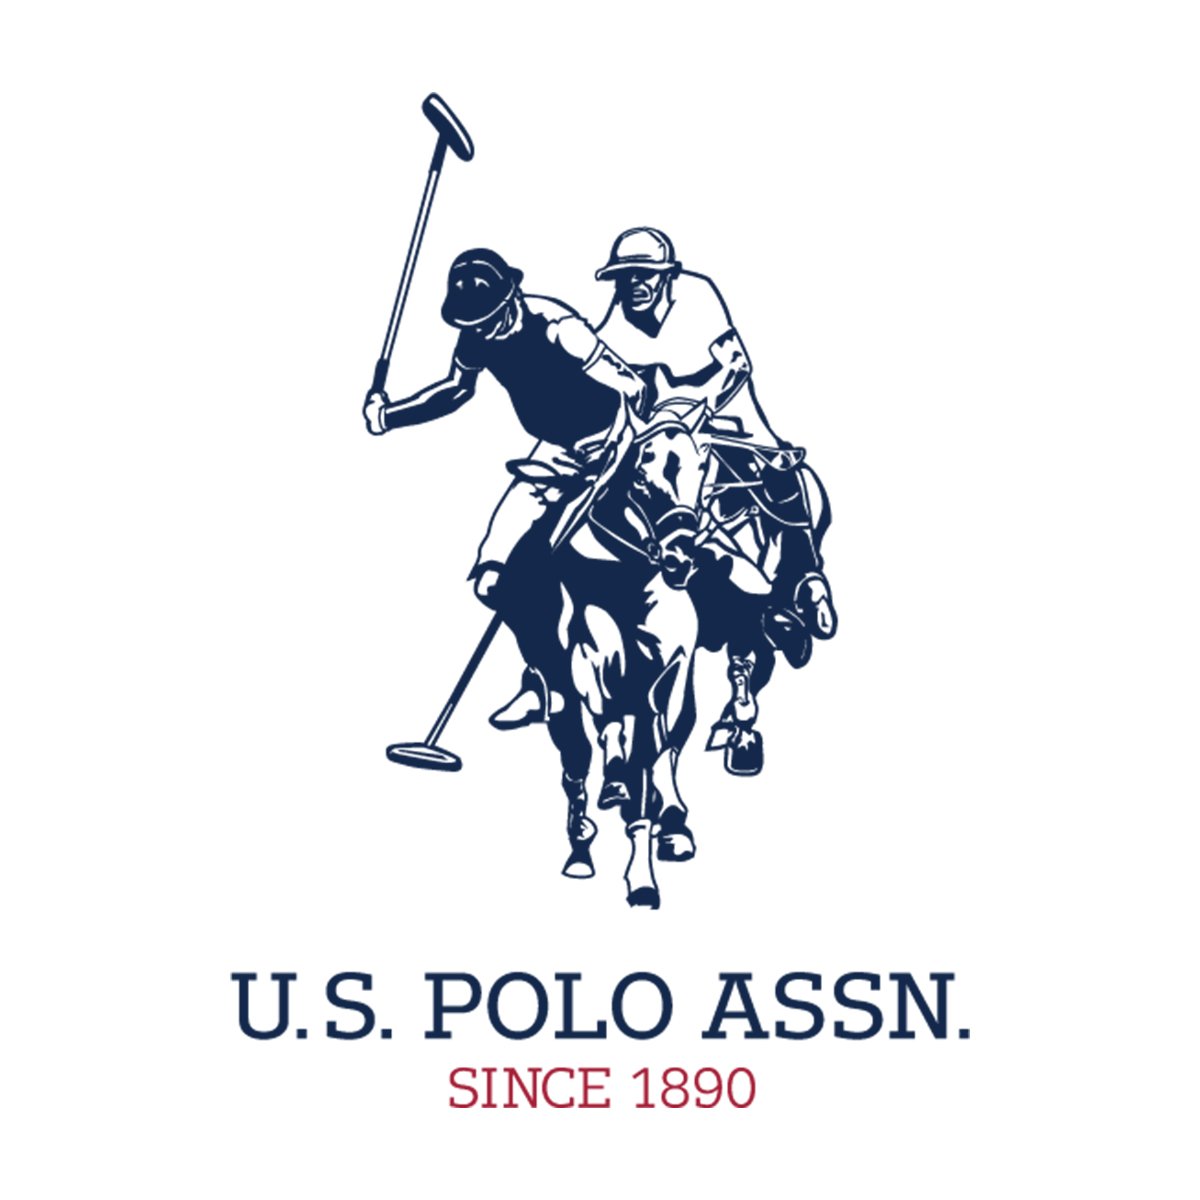 Official Instagram page for the @uspoloassn brand in South Africa. #LiveAuthentically #USPoloAssnZA